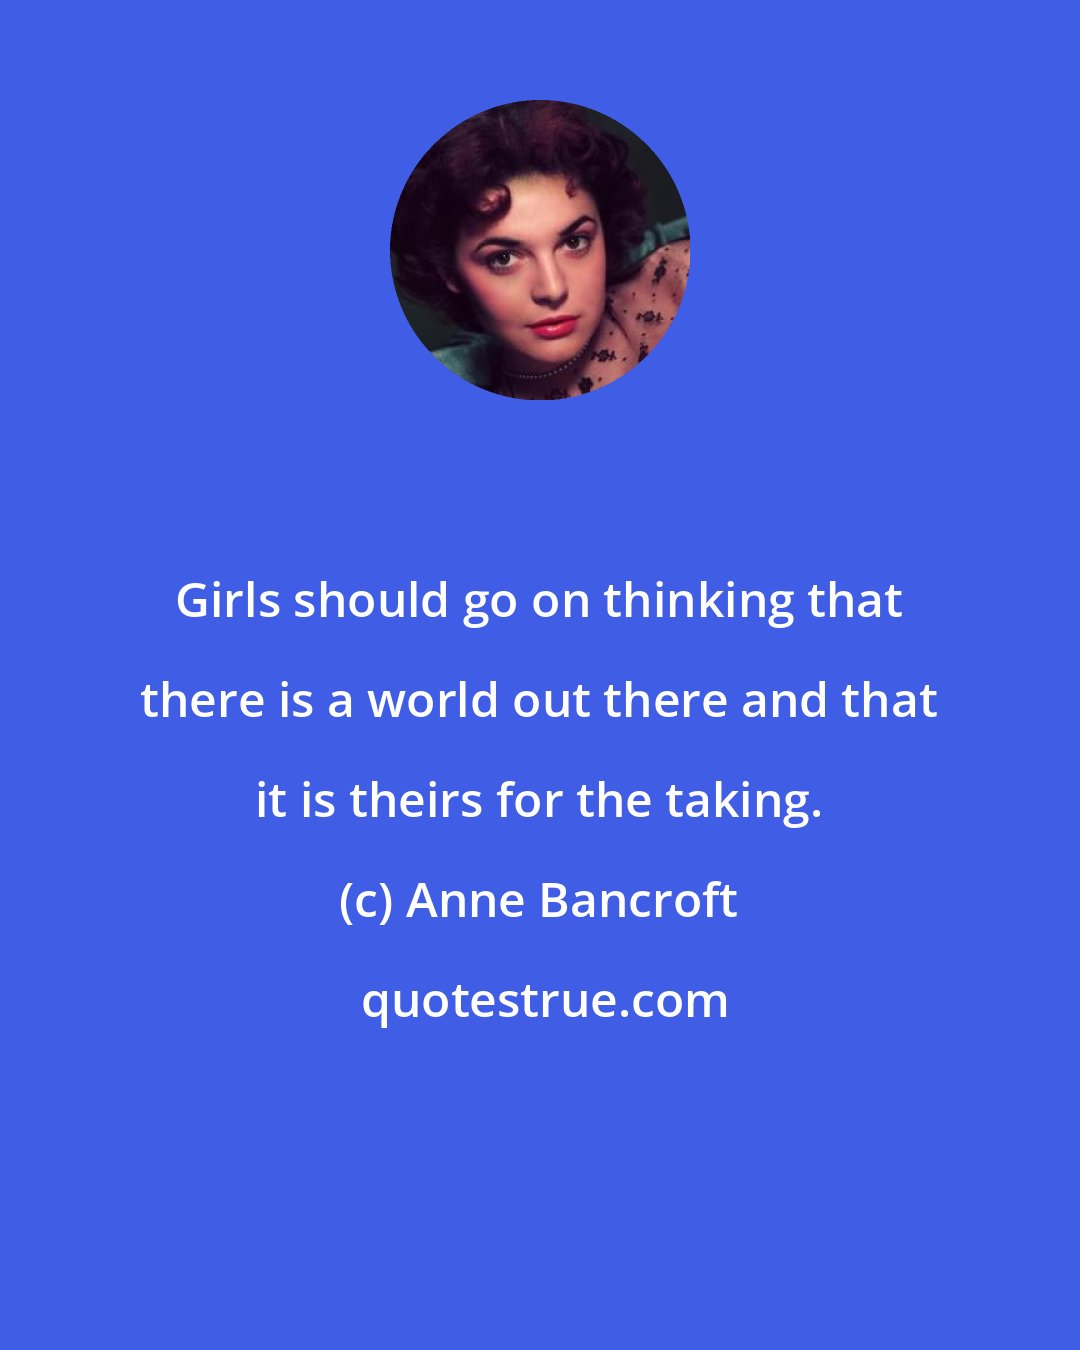 Anne Bancroft: Girls should go on thinking that there is a world out there and that it is theirs for the taking.